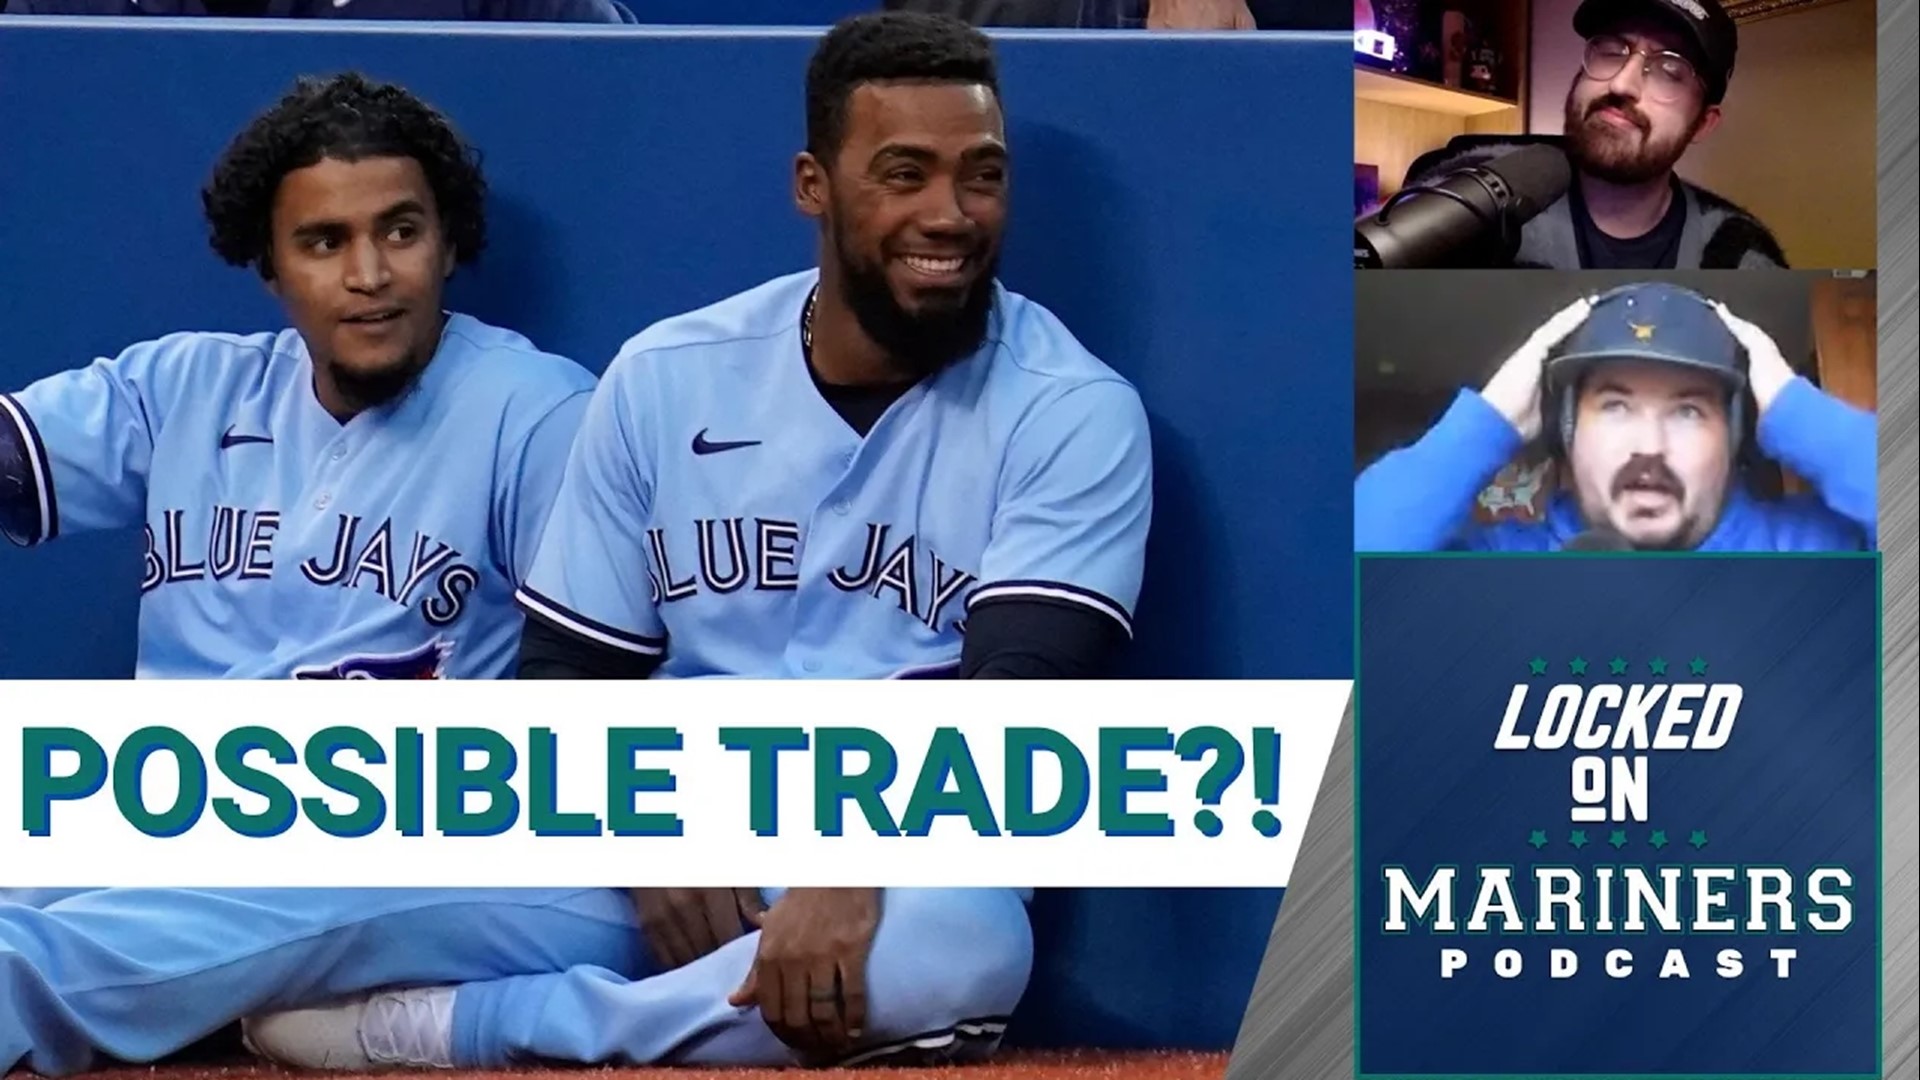 We are two days away from the official start of free agency, but the Seattle Mariners will undoubtedly use the trade market to acquire talent as well.